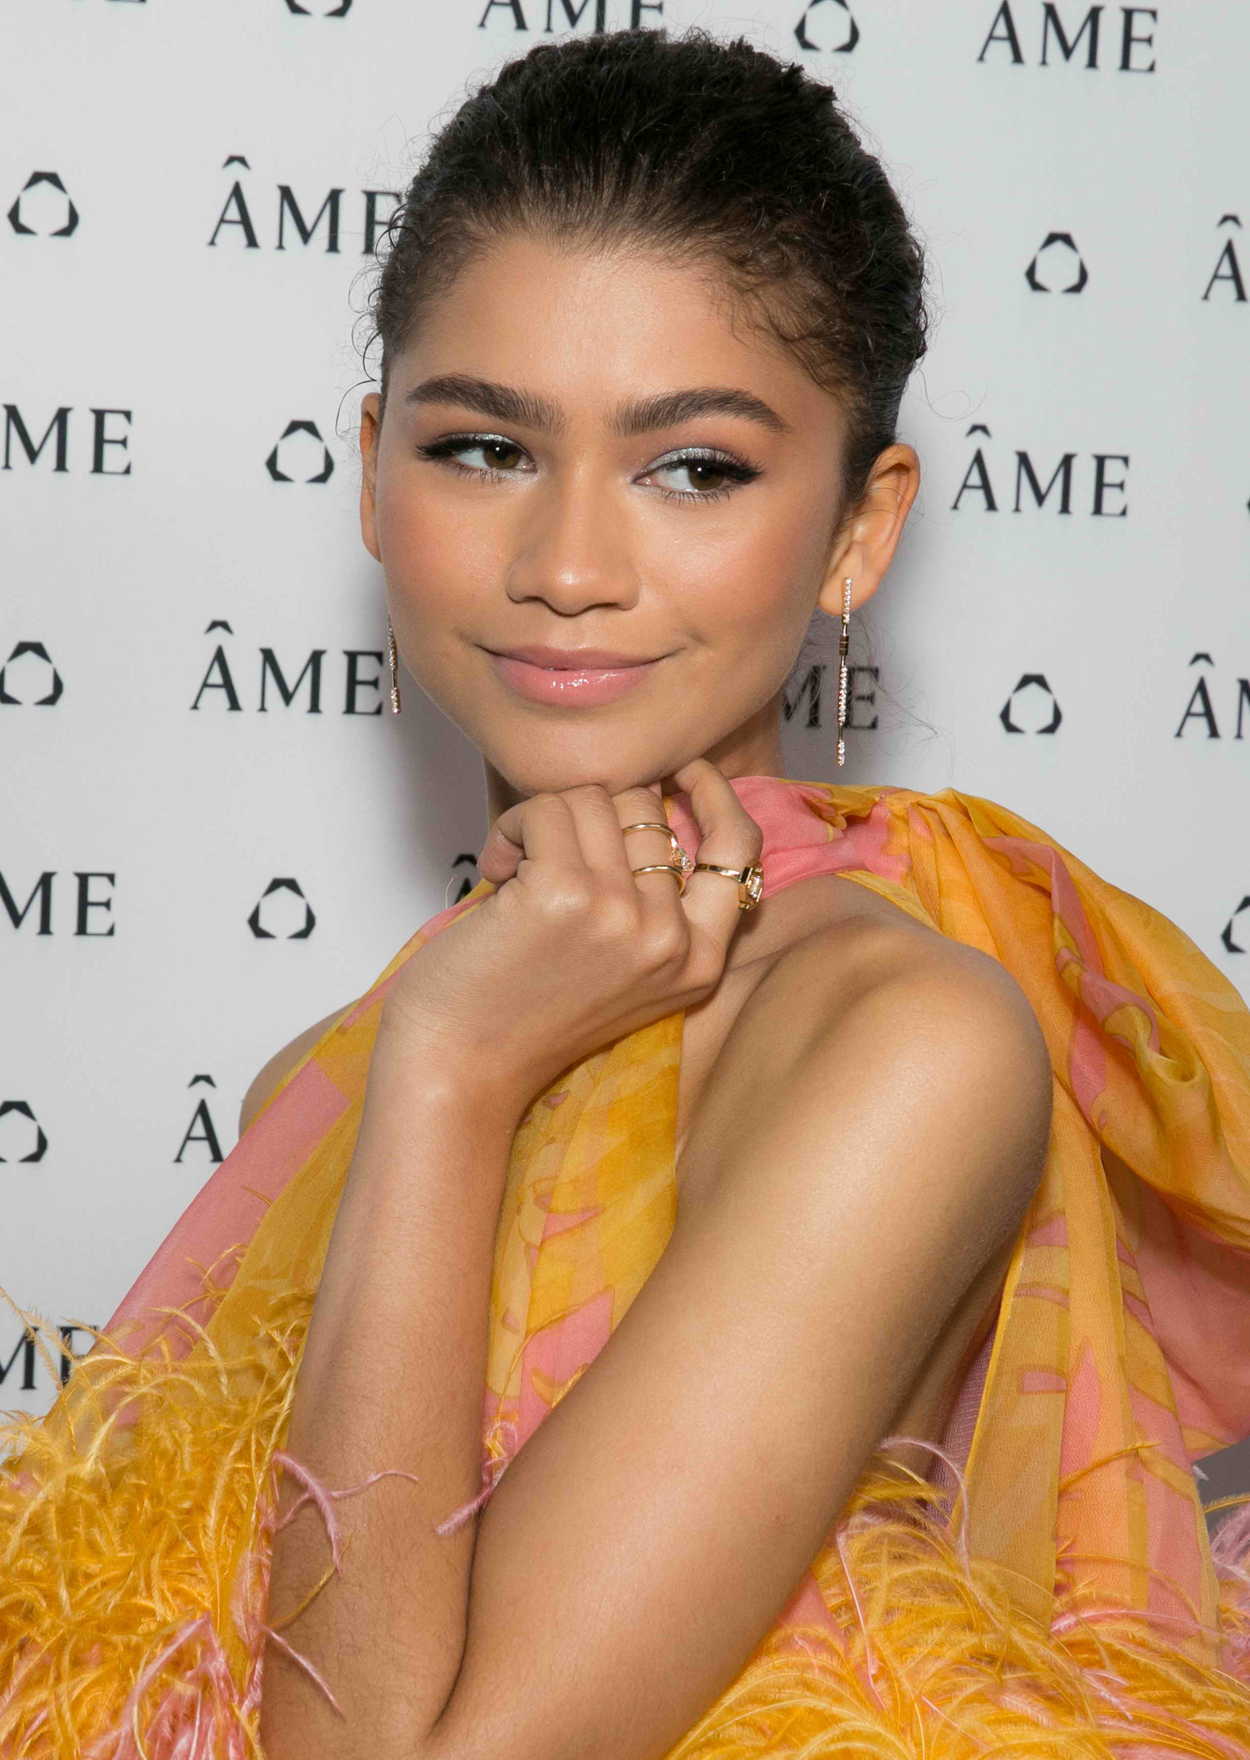 Zendaya Attends AME Jewelry Launch Event at Eric Buterbaugh Gallery in Sant...